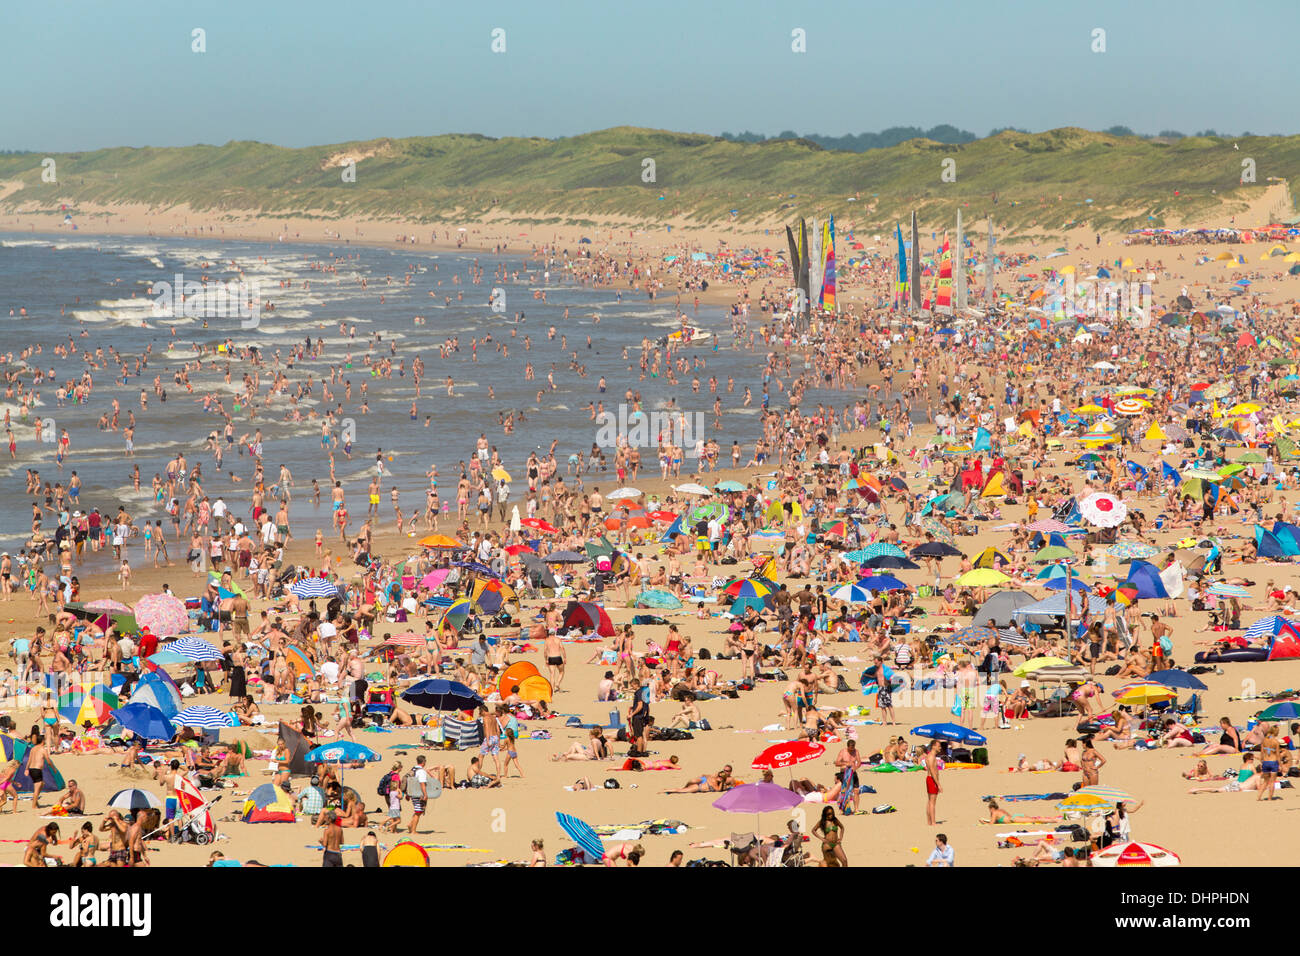 Netherlands, Scheveningen, near The Hague. Summertime on crowded beach. People enjoying sun and sea water. Aerial view. Stock Photo